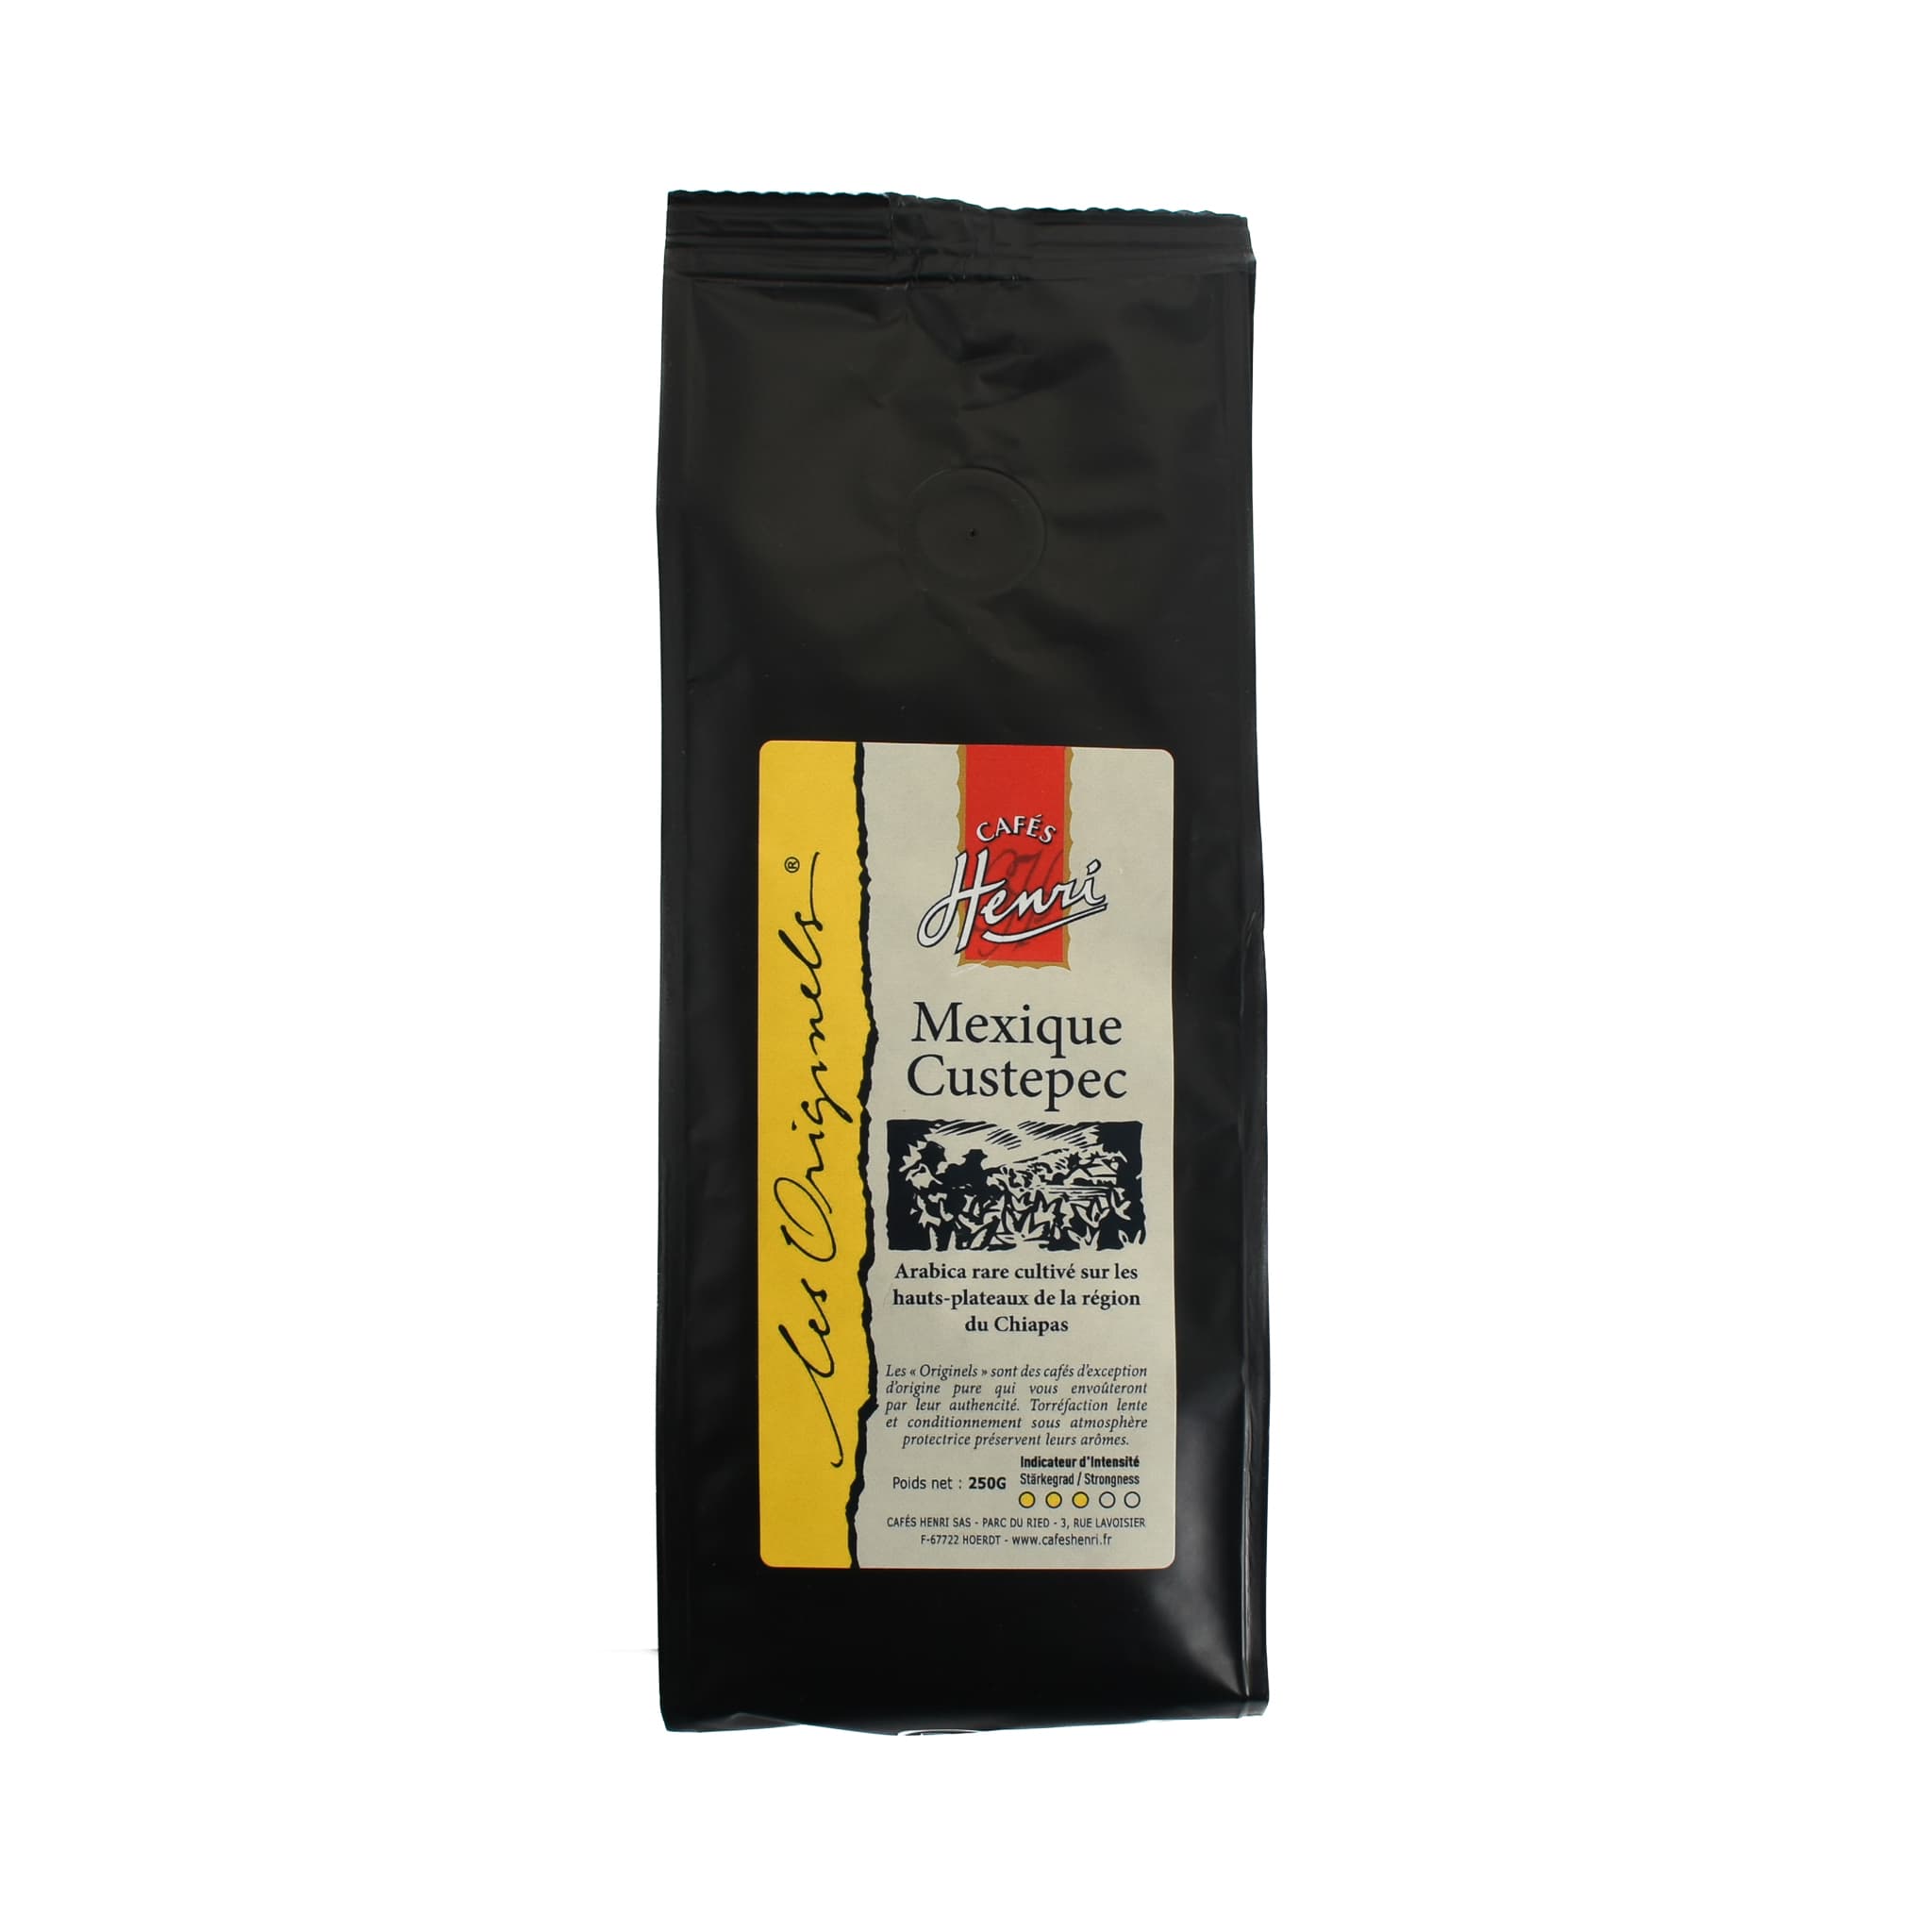 Cafes Henri Ground Mexican Coffee from Custepec, 250g